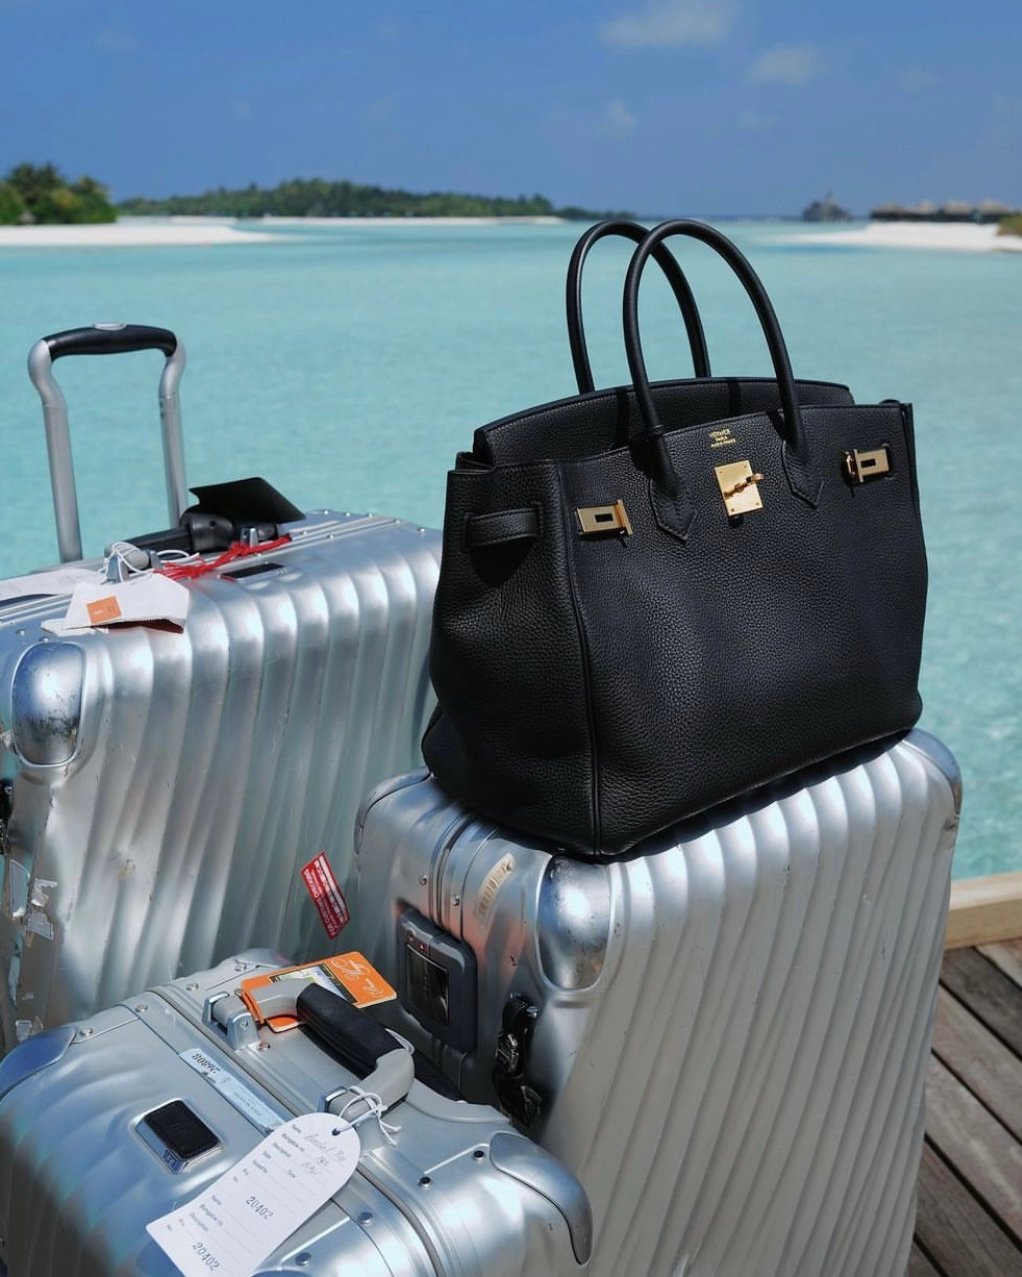 Is it Cheaper to Buy a Luxury Bag in the UK or France? - PurseBop